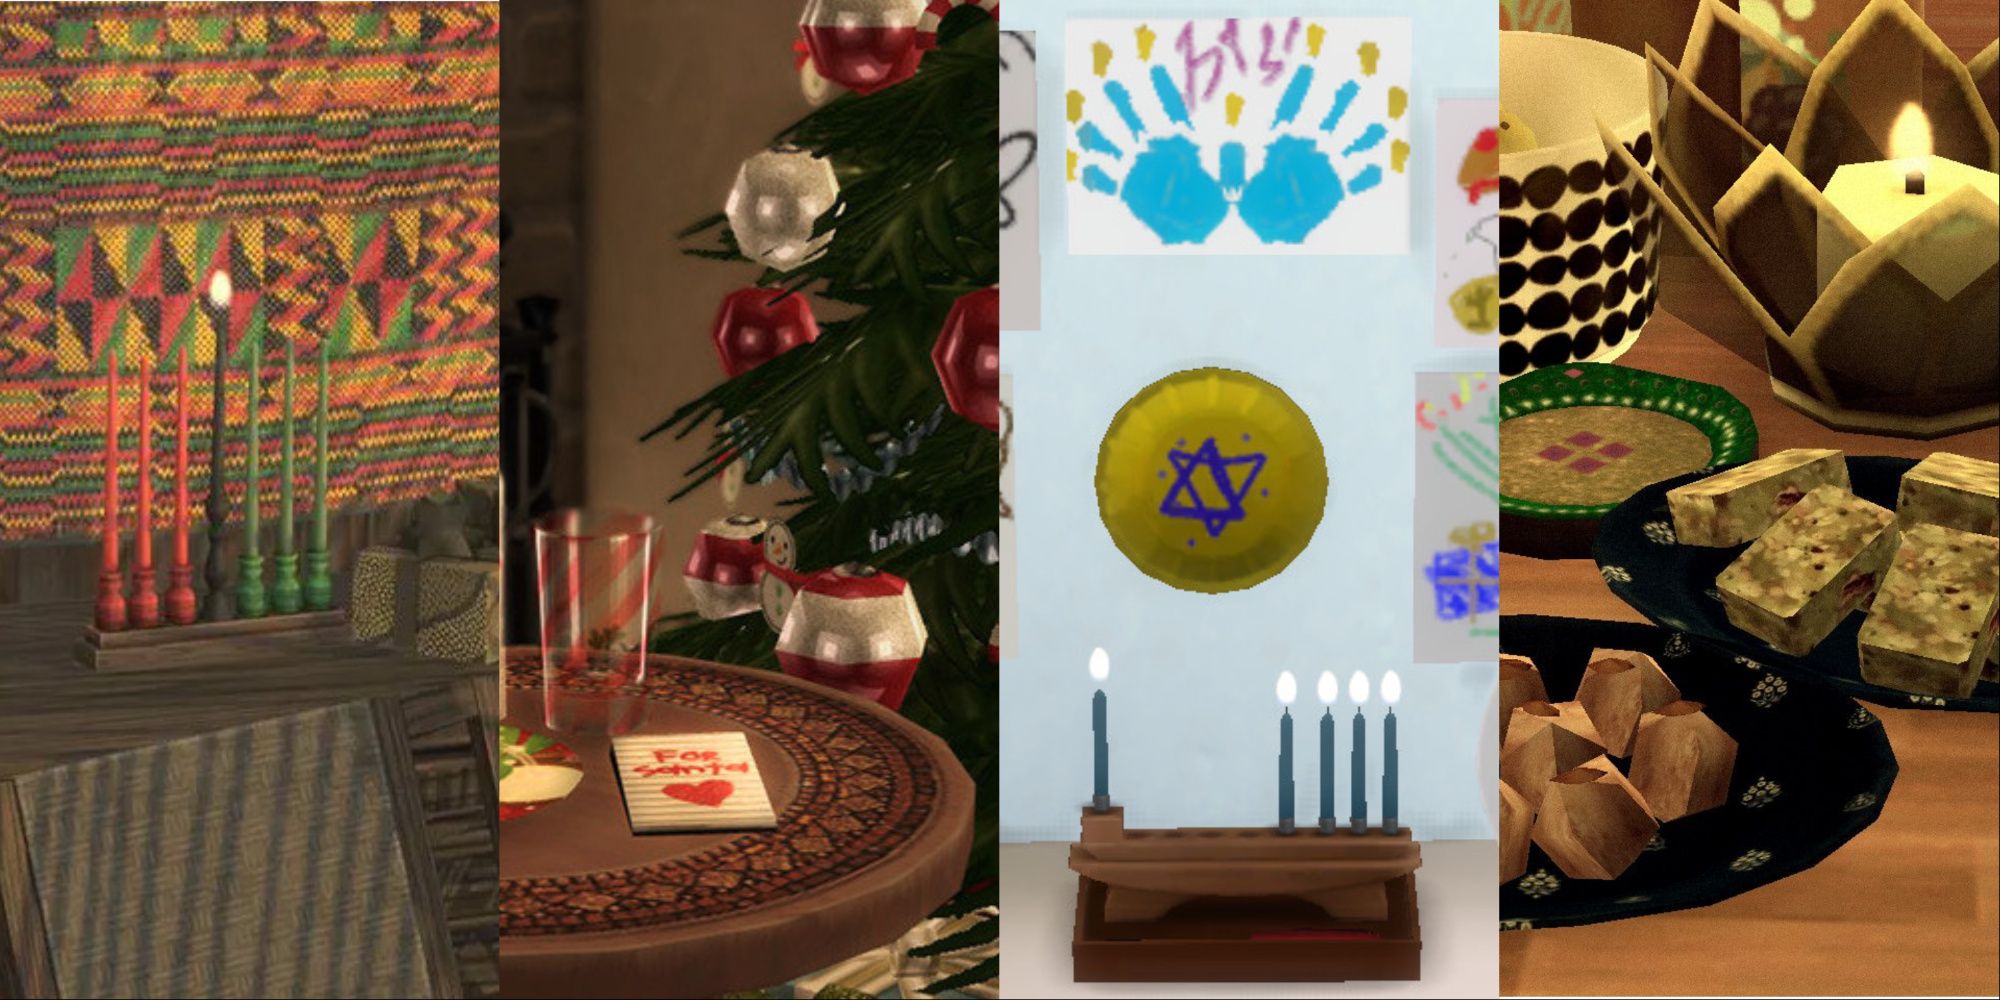 From left to right: snapshot of a Kwanzaa dining set, milk and cookies left out for Santa, a selection of Hanukkah crafts, and a table seet with sweets for Diwali